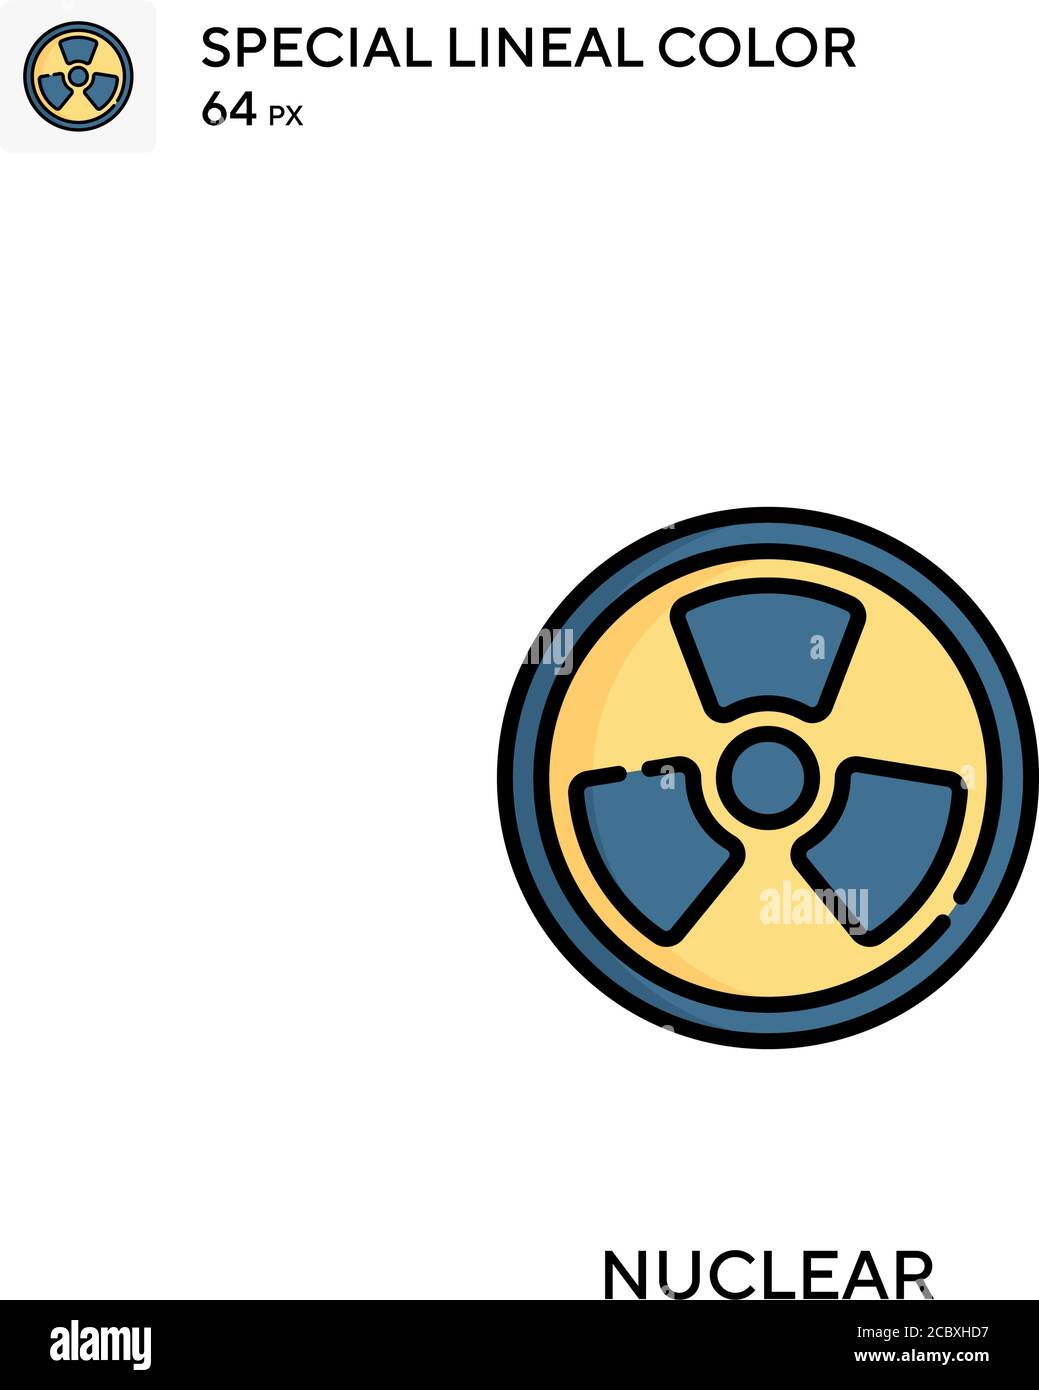 Nuclear Special lineal color vector icon. Nuclear icons for your business project Stock Vector